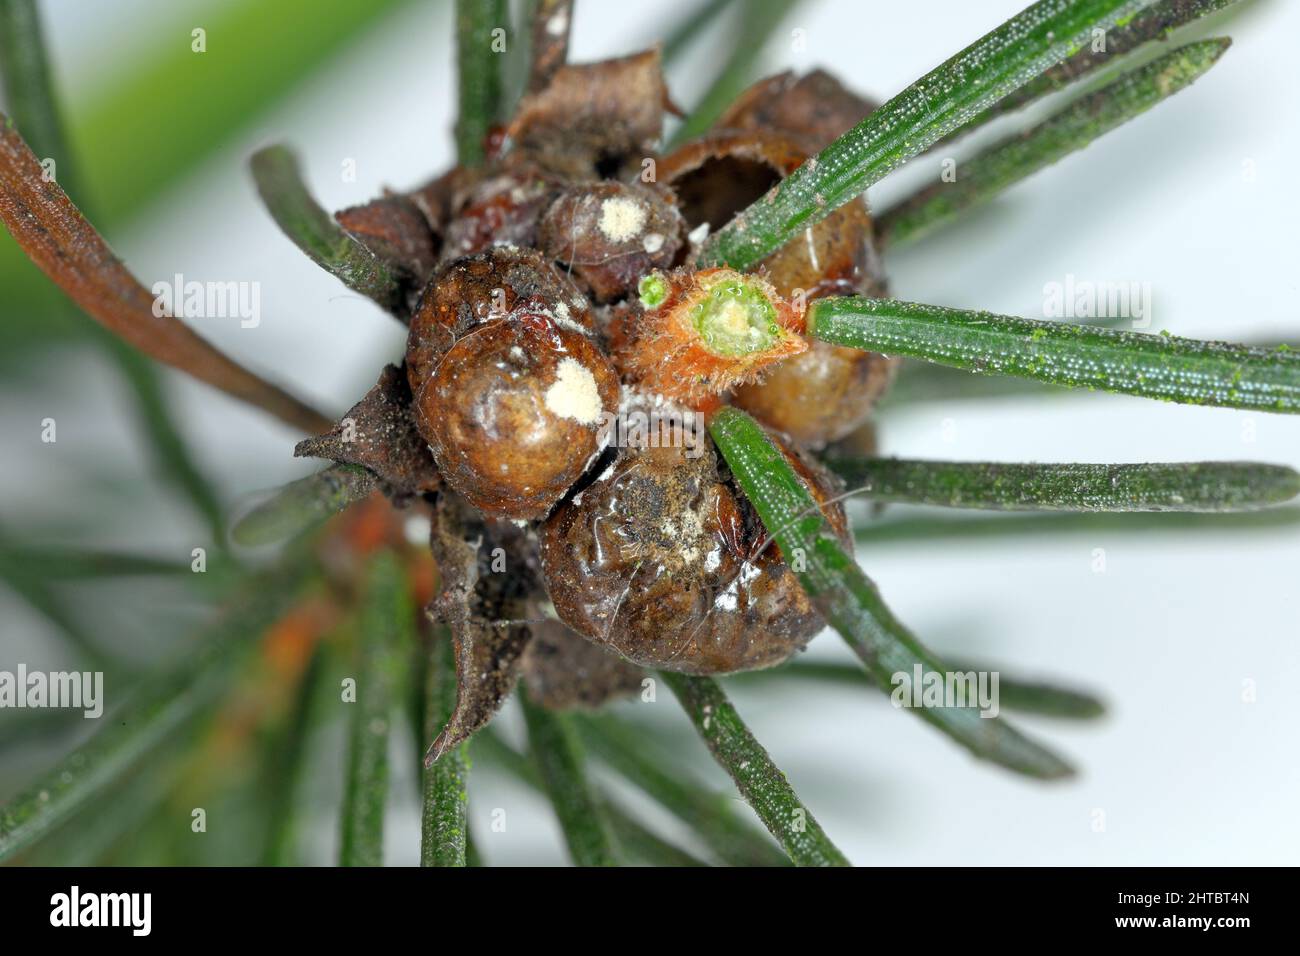 Spruce bud scale (Physokermes piceae) scale insects known as the bud scales. A pest on the shoot of spruce in the garden. Stock Photo